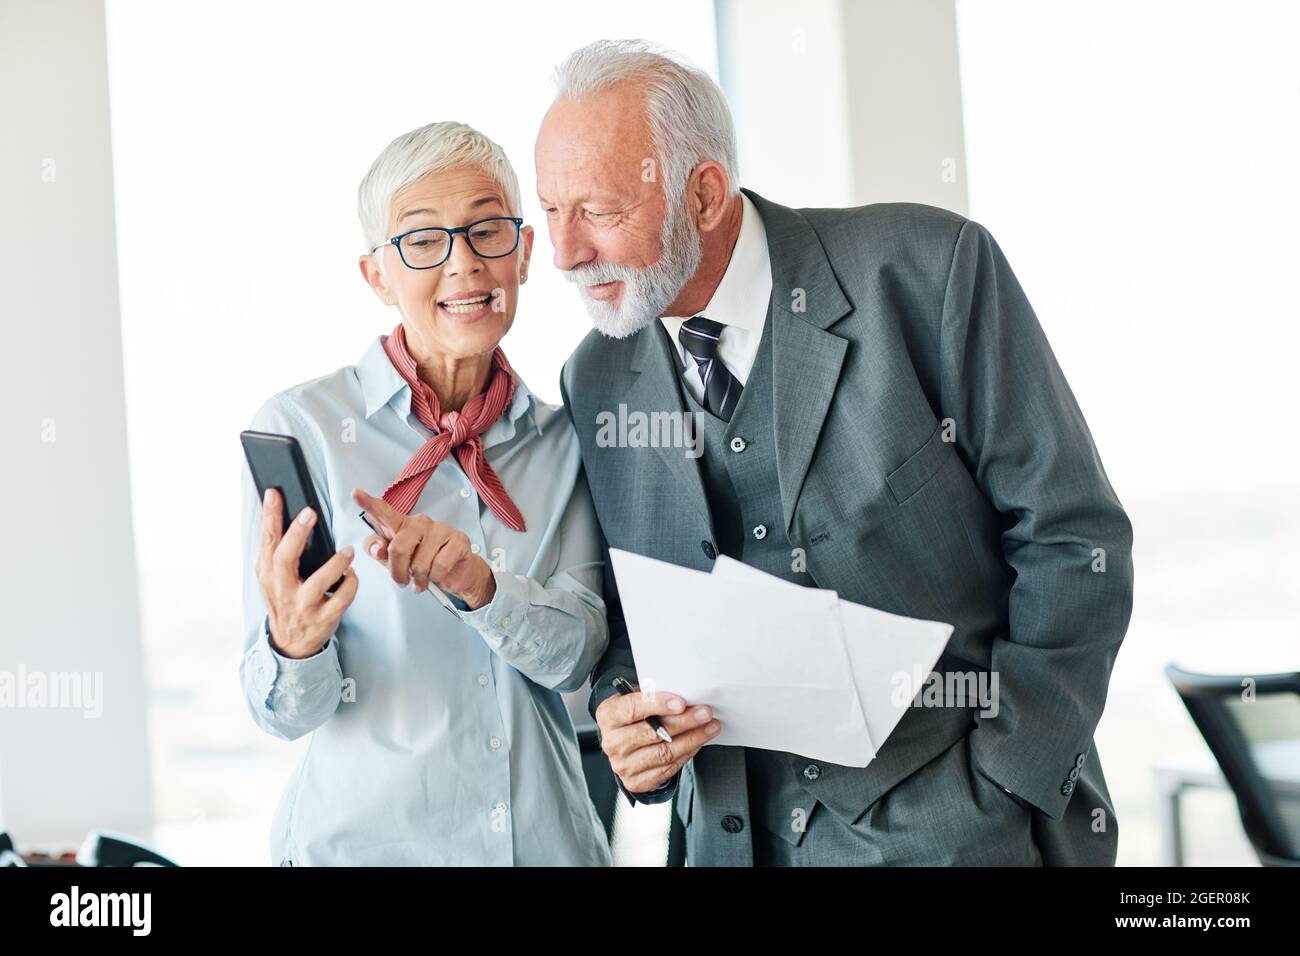 business office person discussion mobile phone teamwork senior meeting Stock Photo